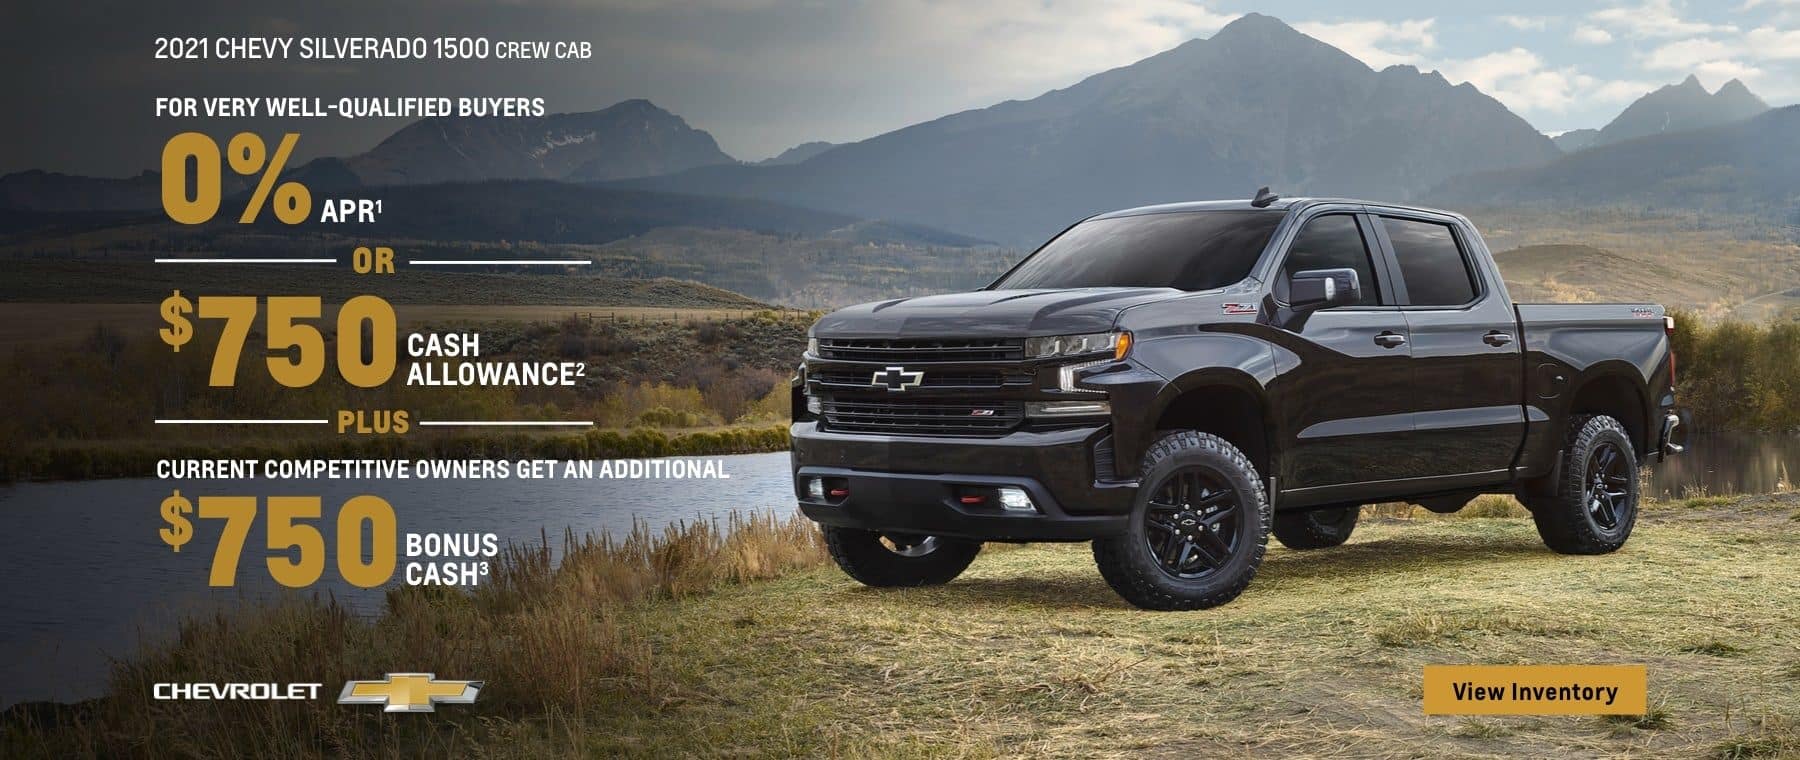 2021 Chevy Silverado 1500 Crew Cab. For very well-qualified buyers 0% APR. Or, $750 cash allowance. Plus, current competitive owners get an additional $750 bonus cash.